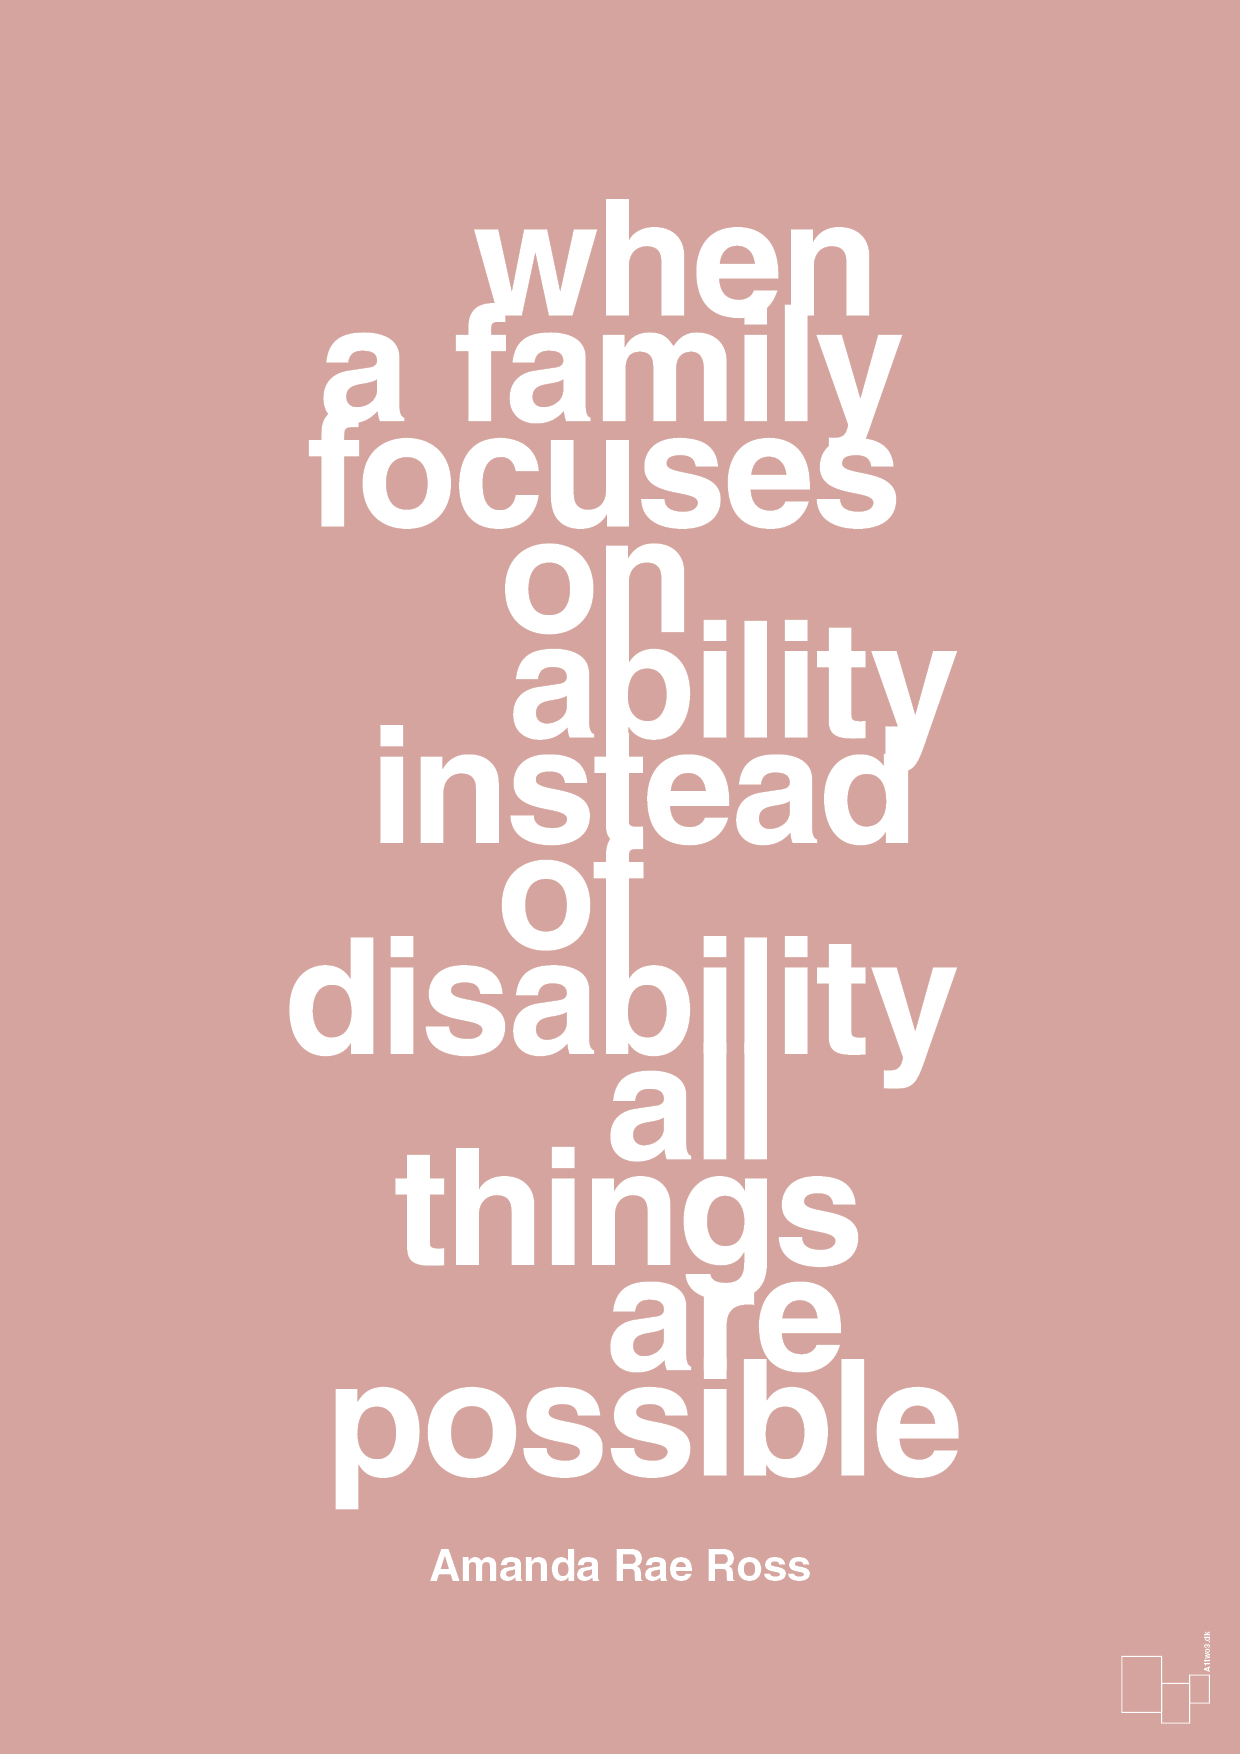 when a family focuses on ability instead of disability all things are possible - Plakat med Samfund i Bubble Shell